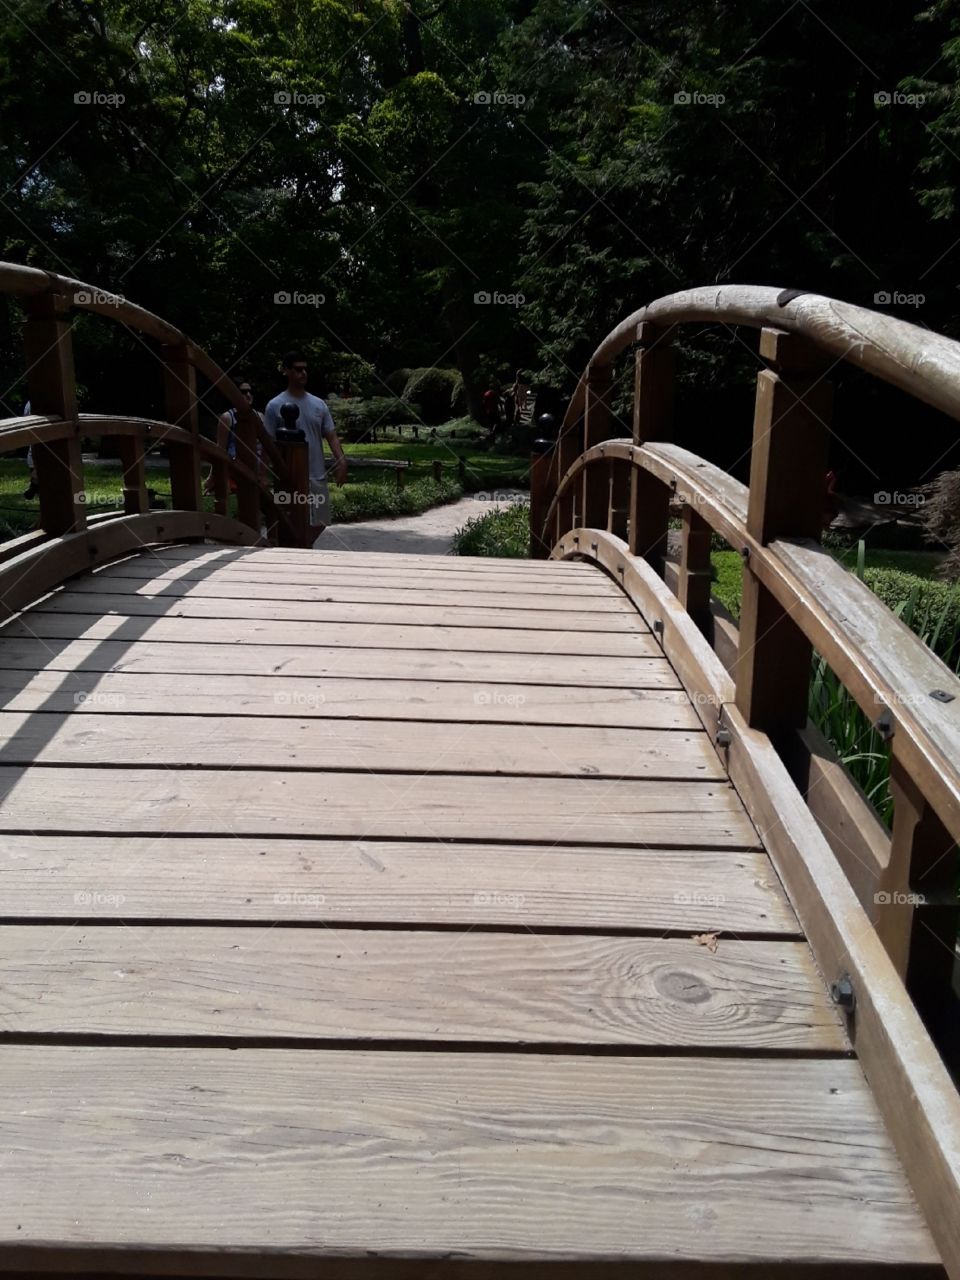 Wooden bridge created to overlook and walk across a small stream/pond water.